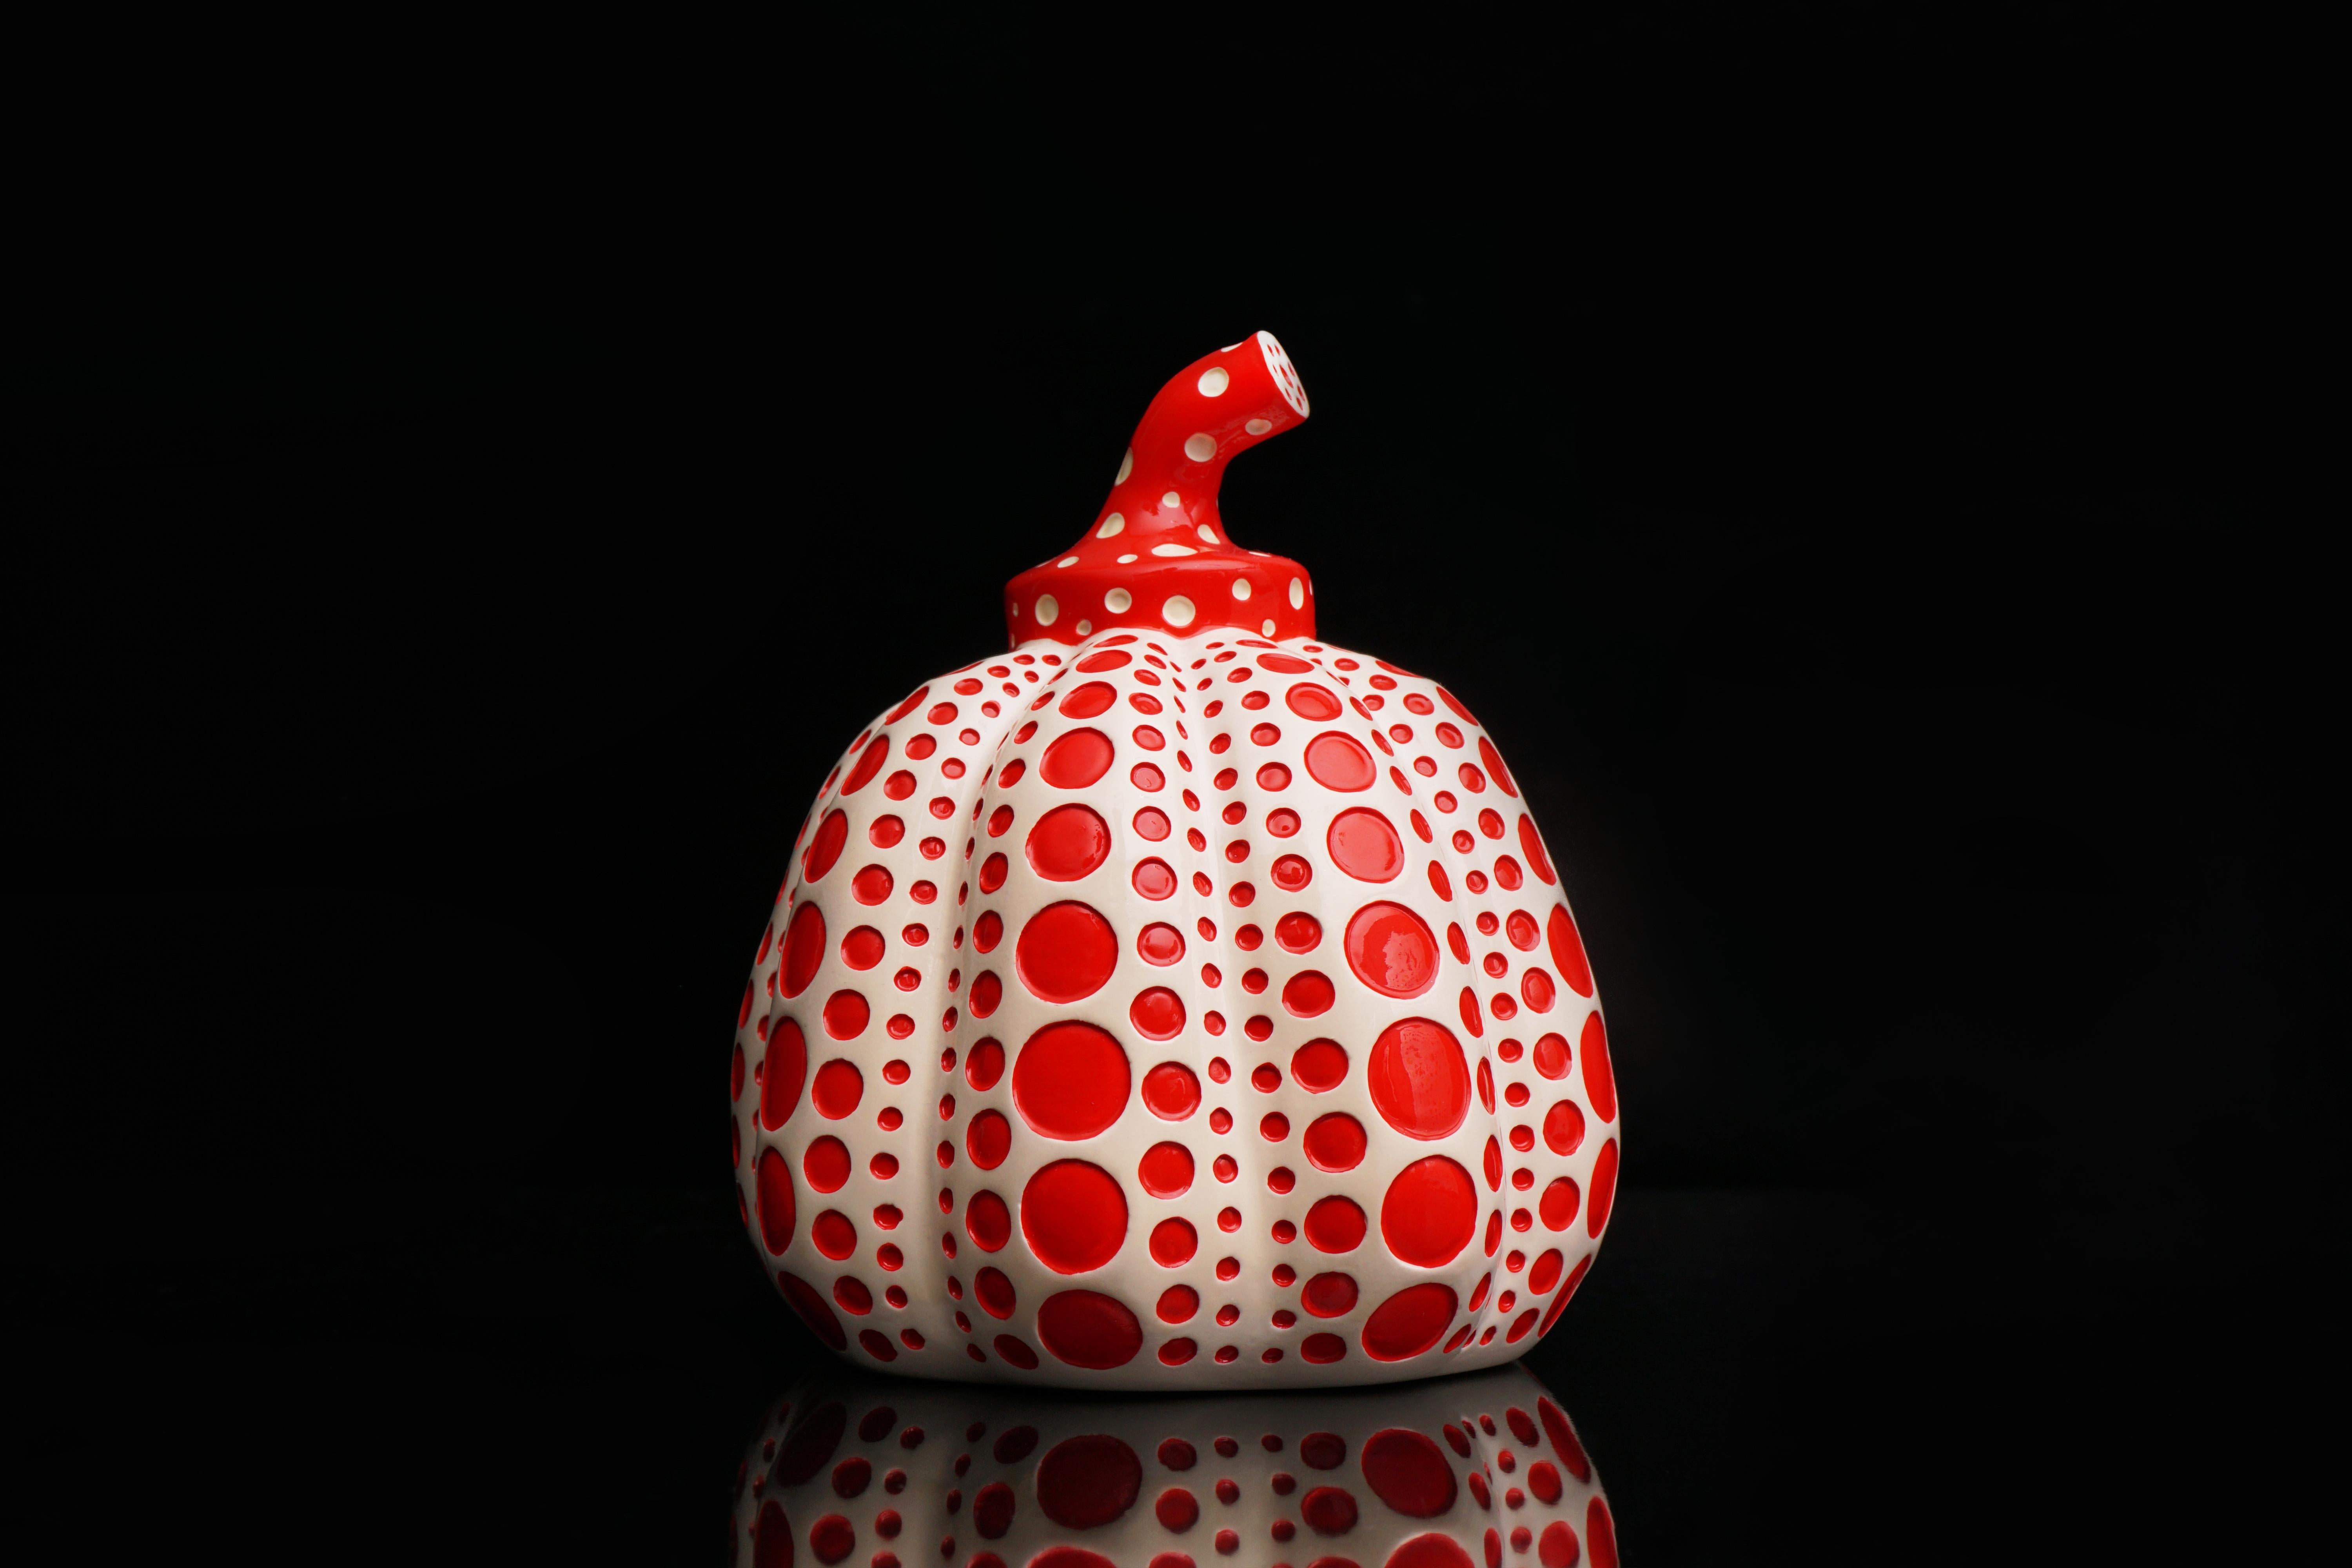 The ’Pumpkin'  sculpture is a polka-dotted painted lacquer resin collectible art object by the legendary contemporary Artist, Yayoi Kusama. Created in 2016, the polka-dot pumpkin series is a quintessential example of Kusama’s iconic spot-patterned